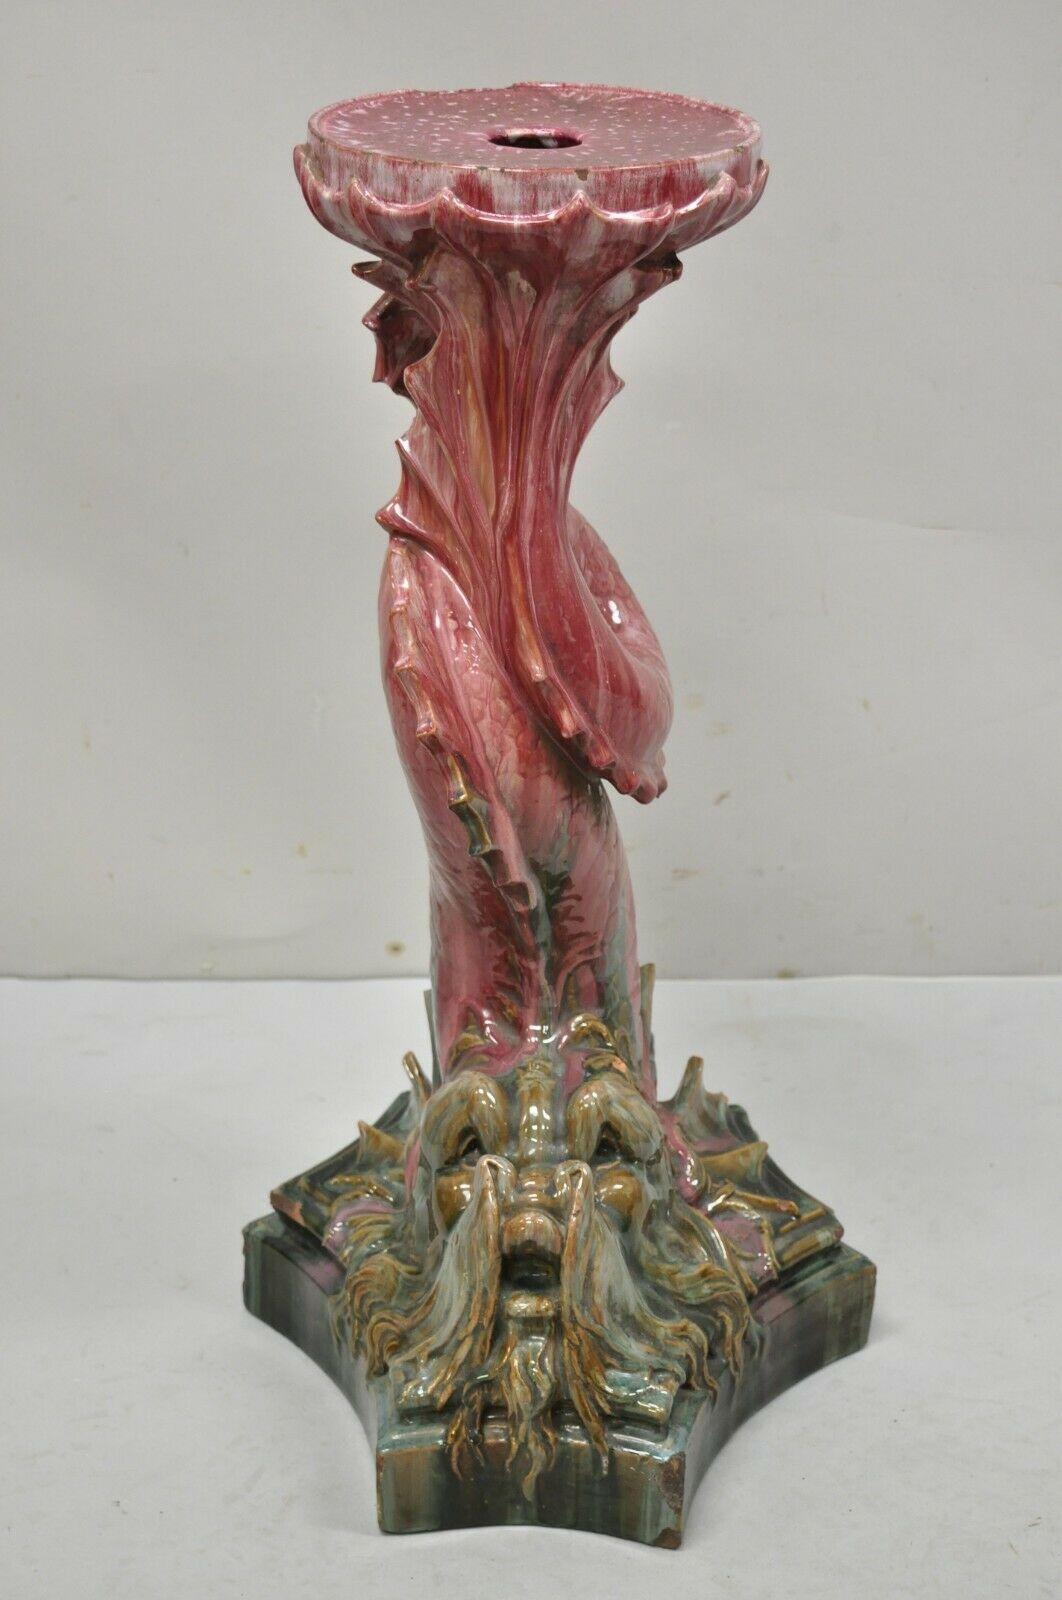 Antique Majolica Terracotta Pottery Dolphin Fish Serpent pink plant stand pedestal. Item features a unique bearded serpent form, glazed terracotta construction, beautiful pink and green color, very nice antique item, great style and form. Circa 19th